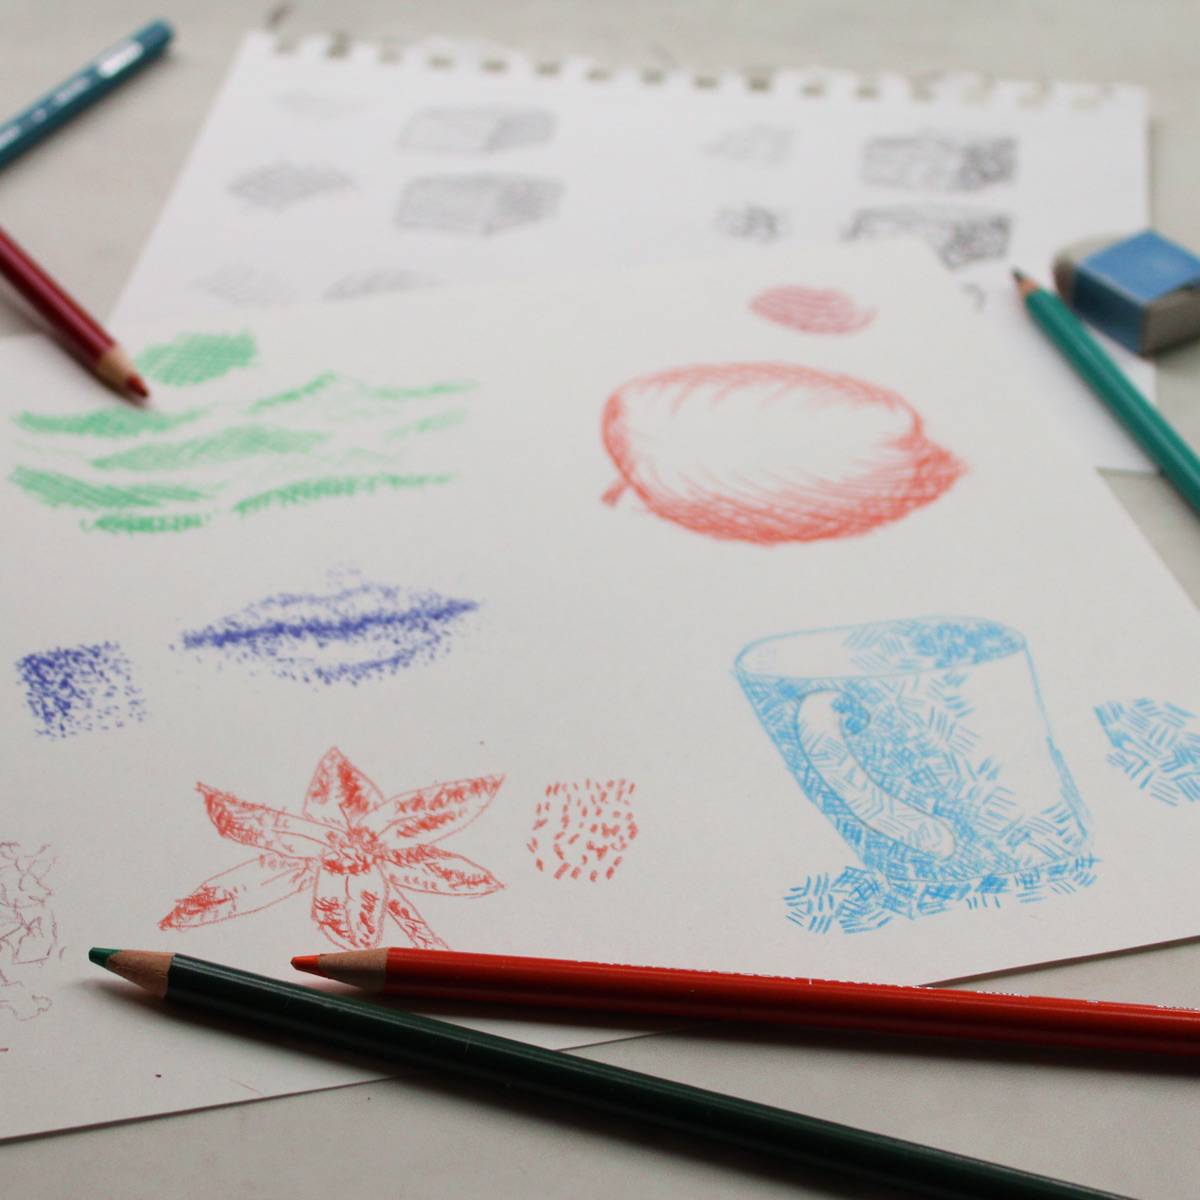 Examples of hatching, crosshatching, contour hatching, woven hatching, scribble hatching, tick hatching and stippling in pencil and colored pencil on white background.